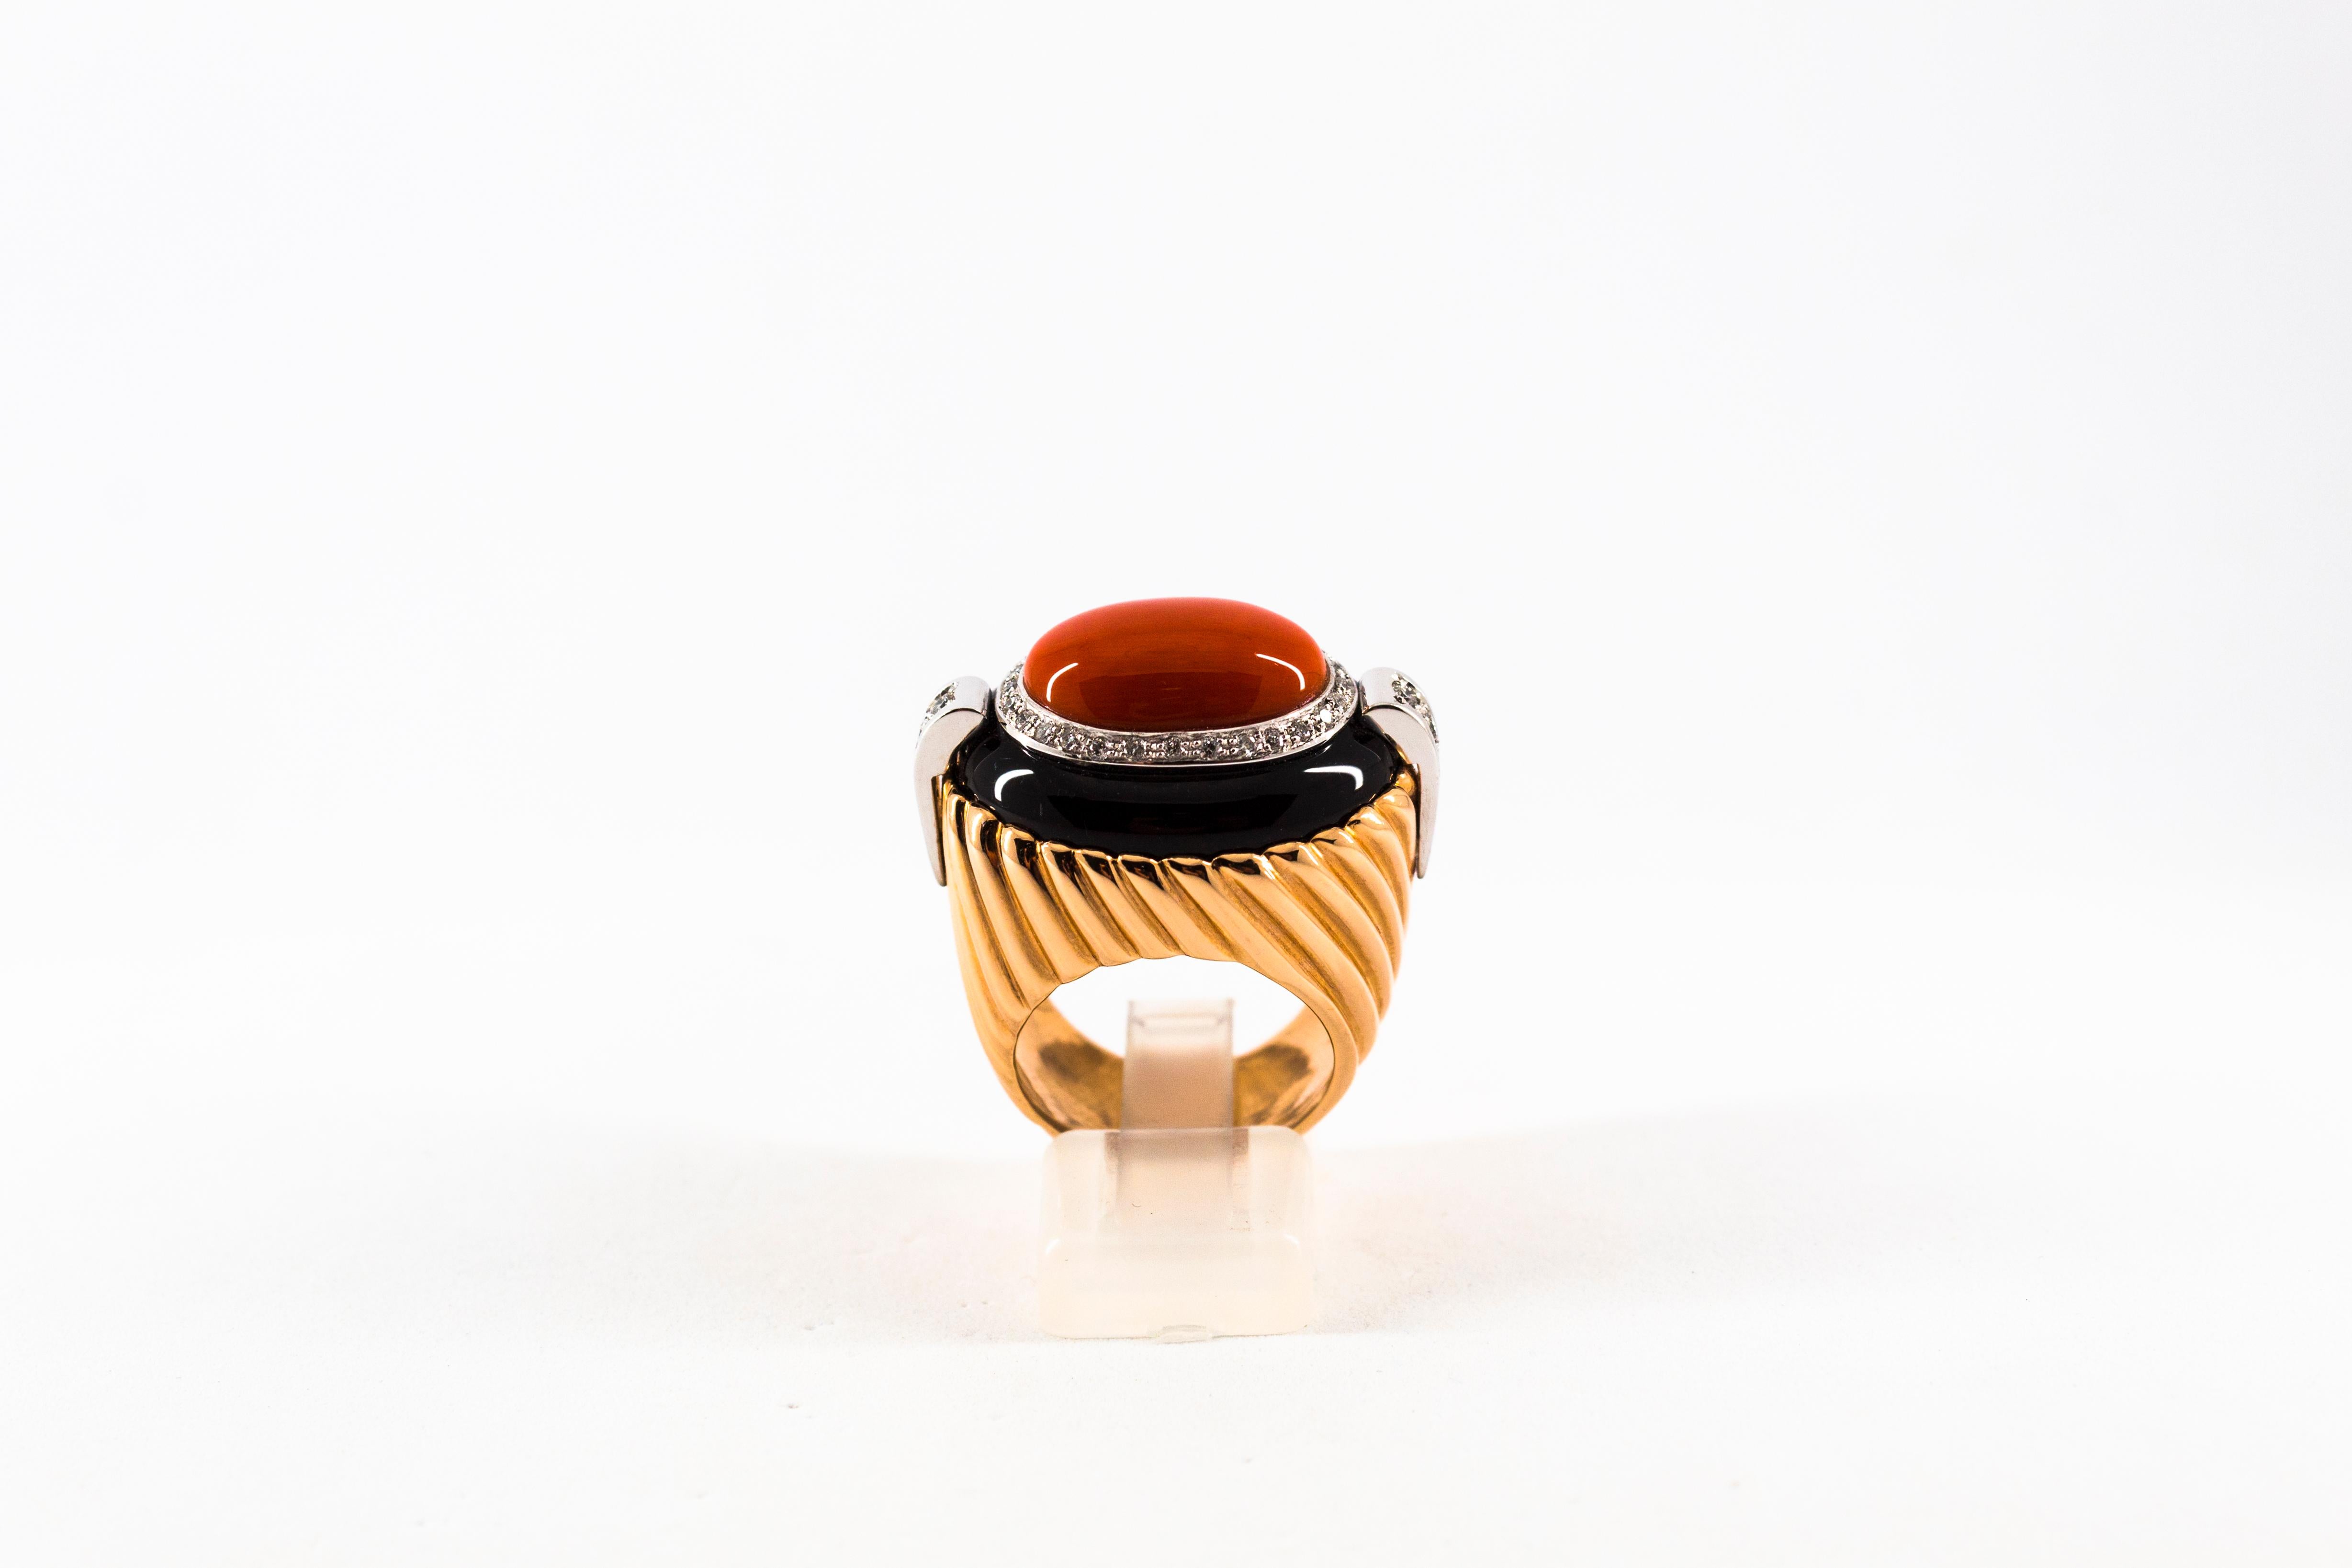 This Ring is made of 14K Yellow Gold.
This Ring has 0.40 Carats of White Diamonds.
This Ring has Red Mediterranean (Sardinia, Italy) Coral.
This Ring has also Onyx.
Size ITA: 14 USA: 7
This Ring is available also with a central Turquoise.
We're a